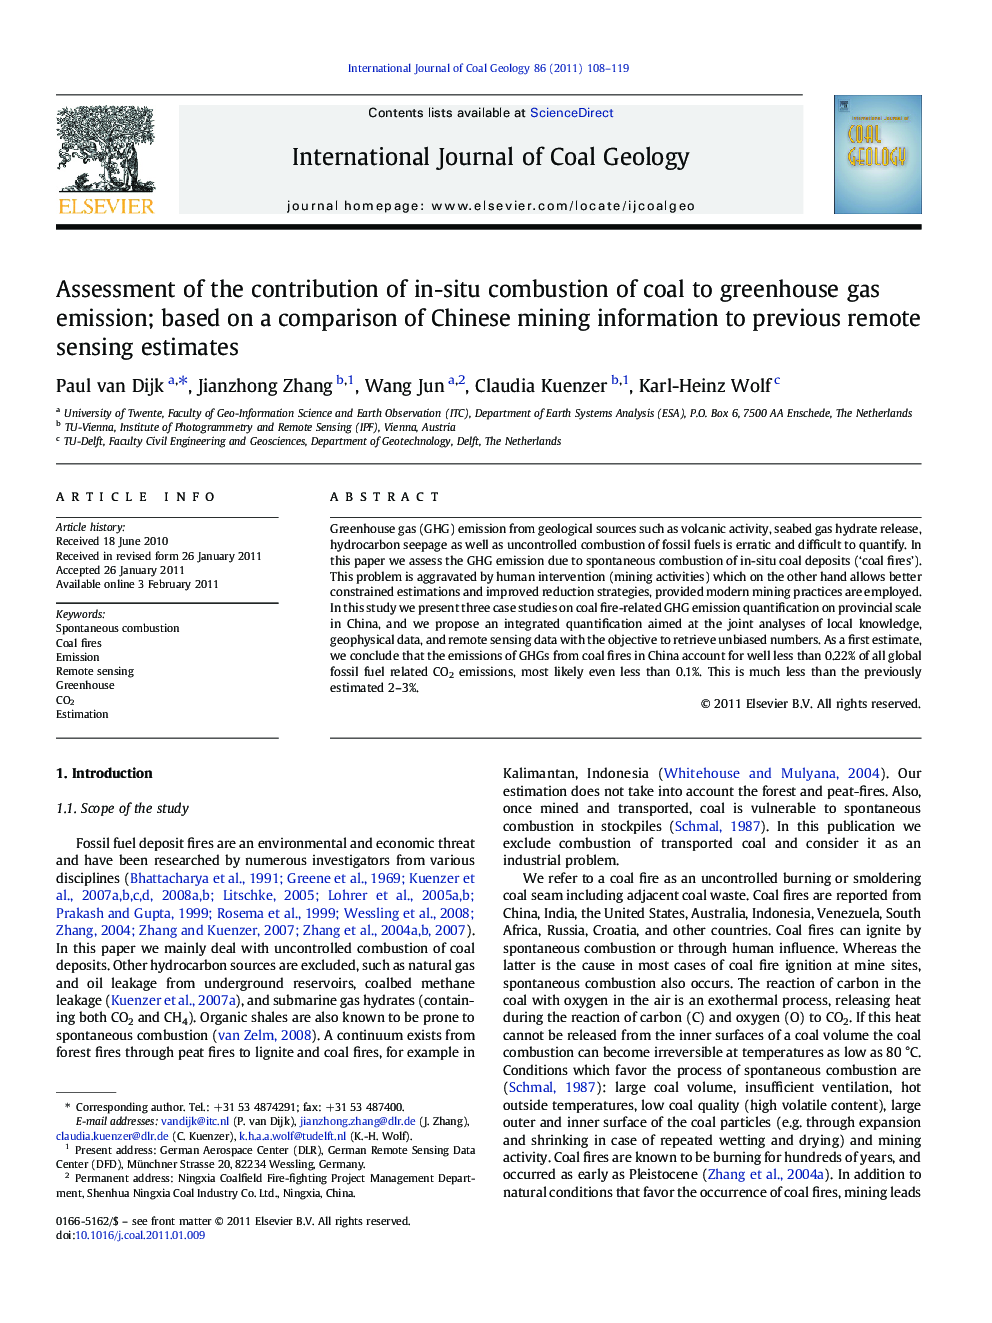 Assessment of the contribution of in-situ combustion of coal to greenhouse gas emission; based on a comparison of Chinese mining information to previous remote sensing estimates